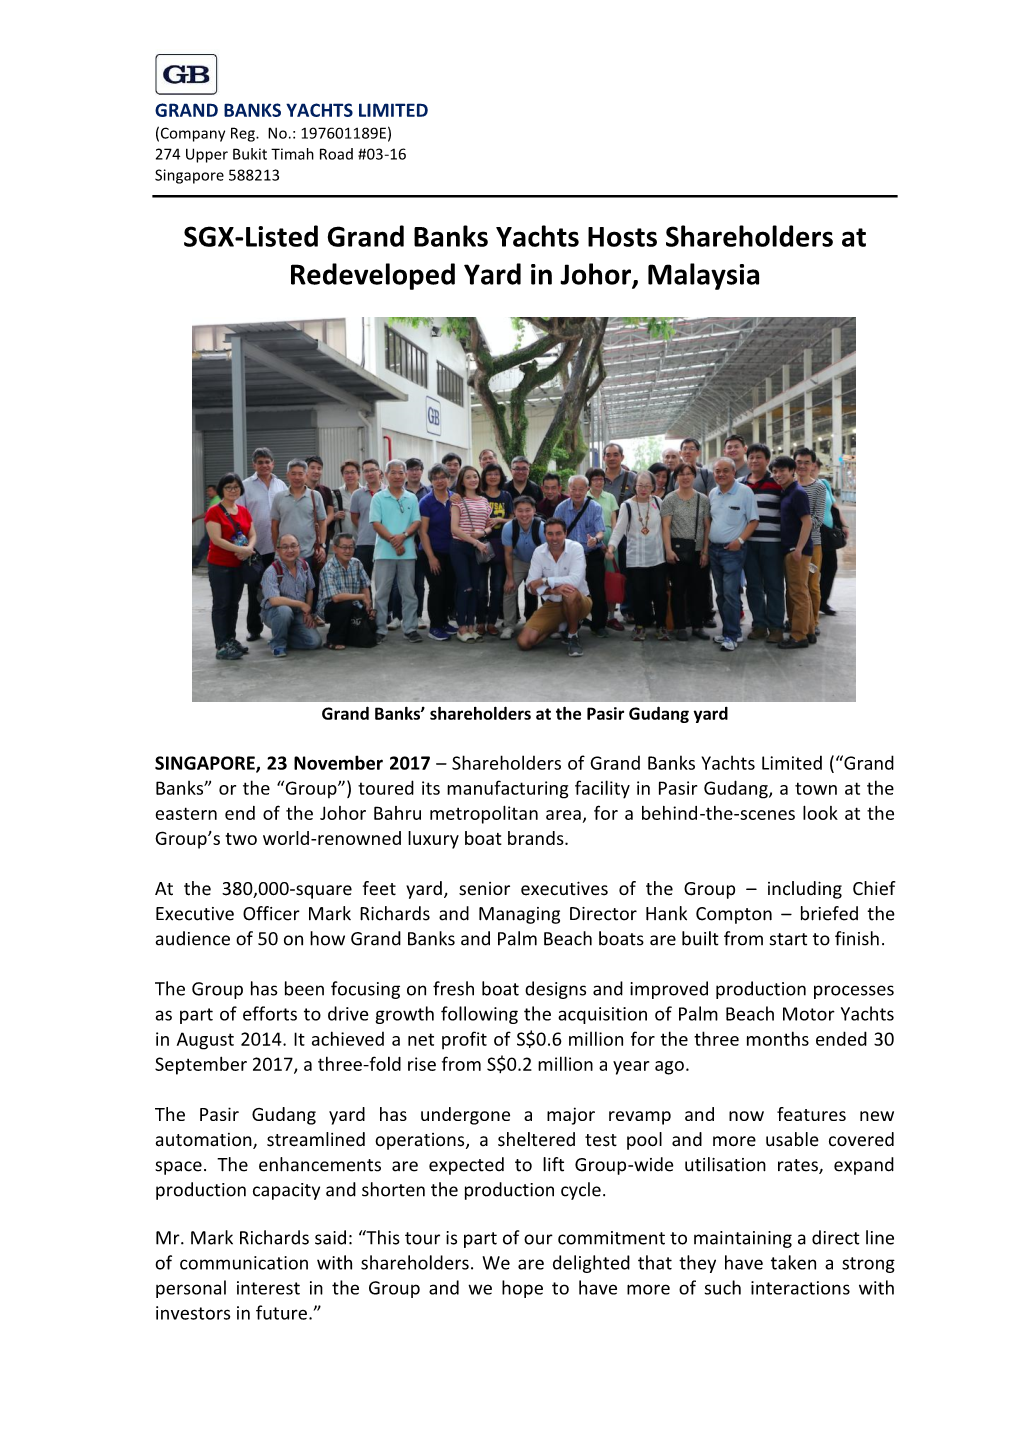 SGX-Listed Grand Banks Yachts Hosts Shareholders at Redeveloped Yard in Johor, Malaysia